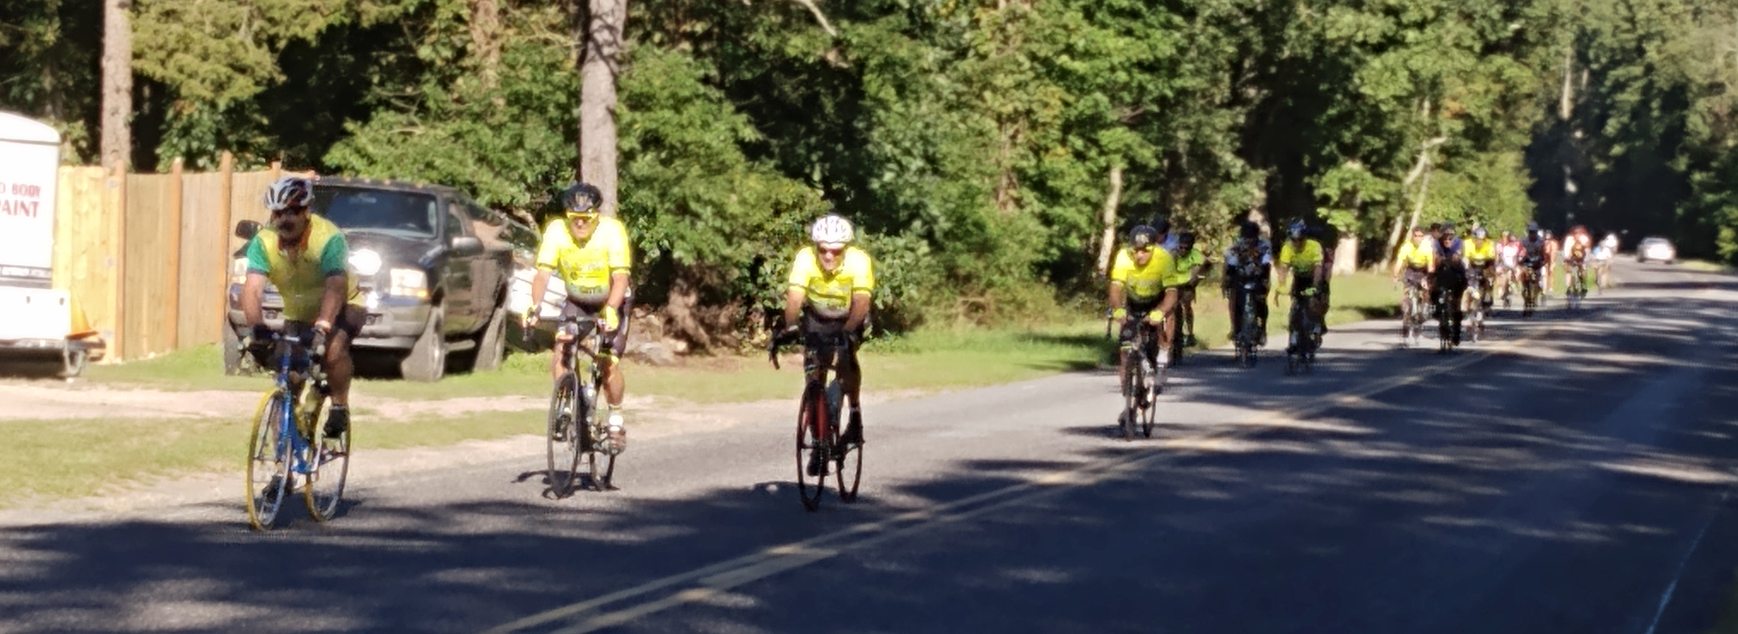 about 20 bicycles riding down a wooded road